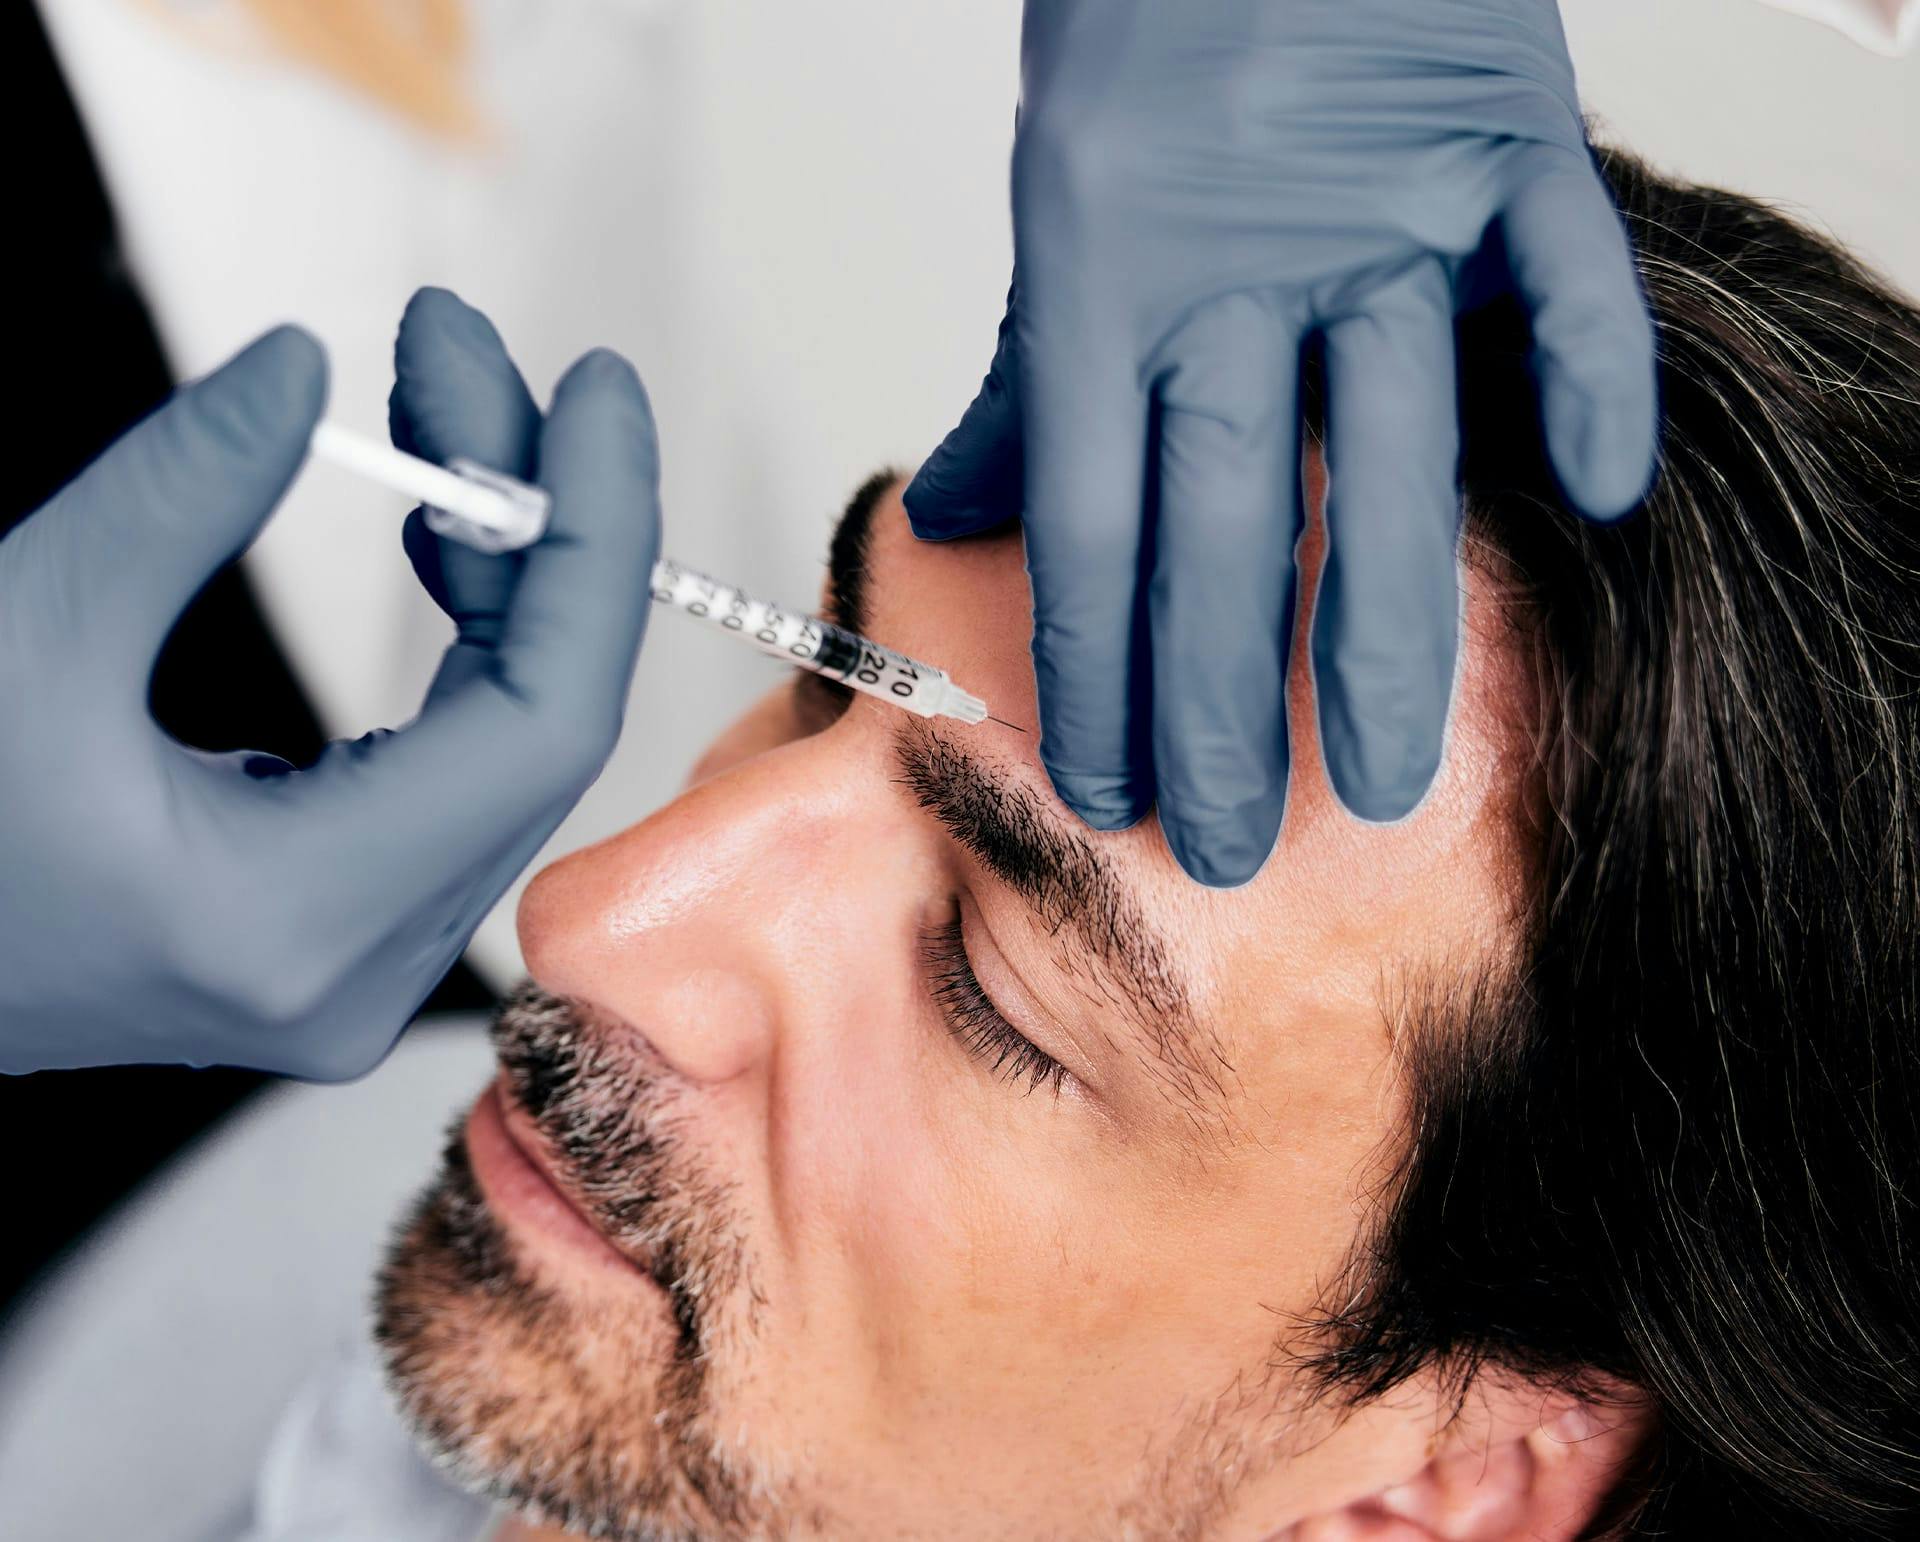 Man receiving injectable treatment